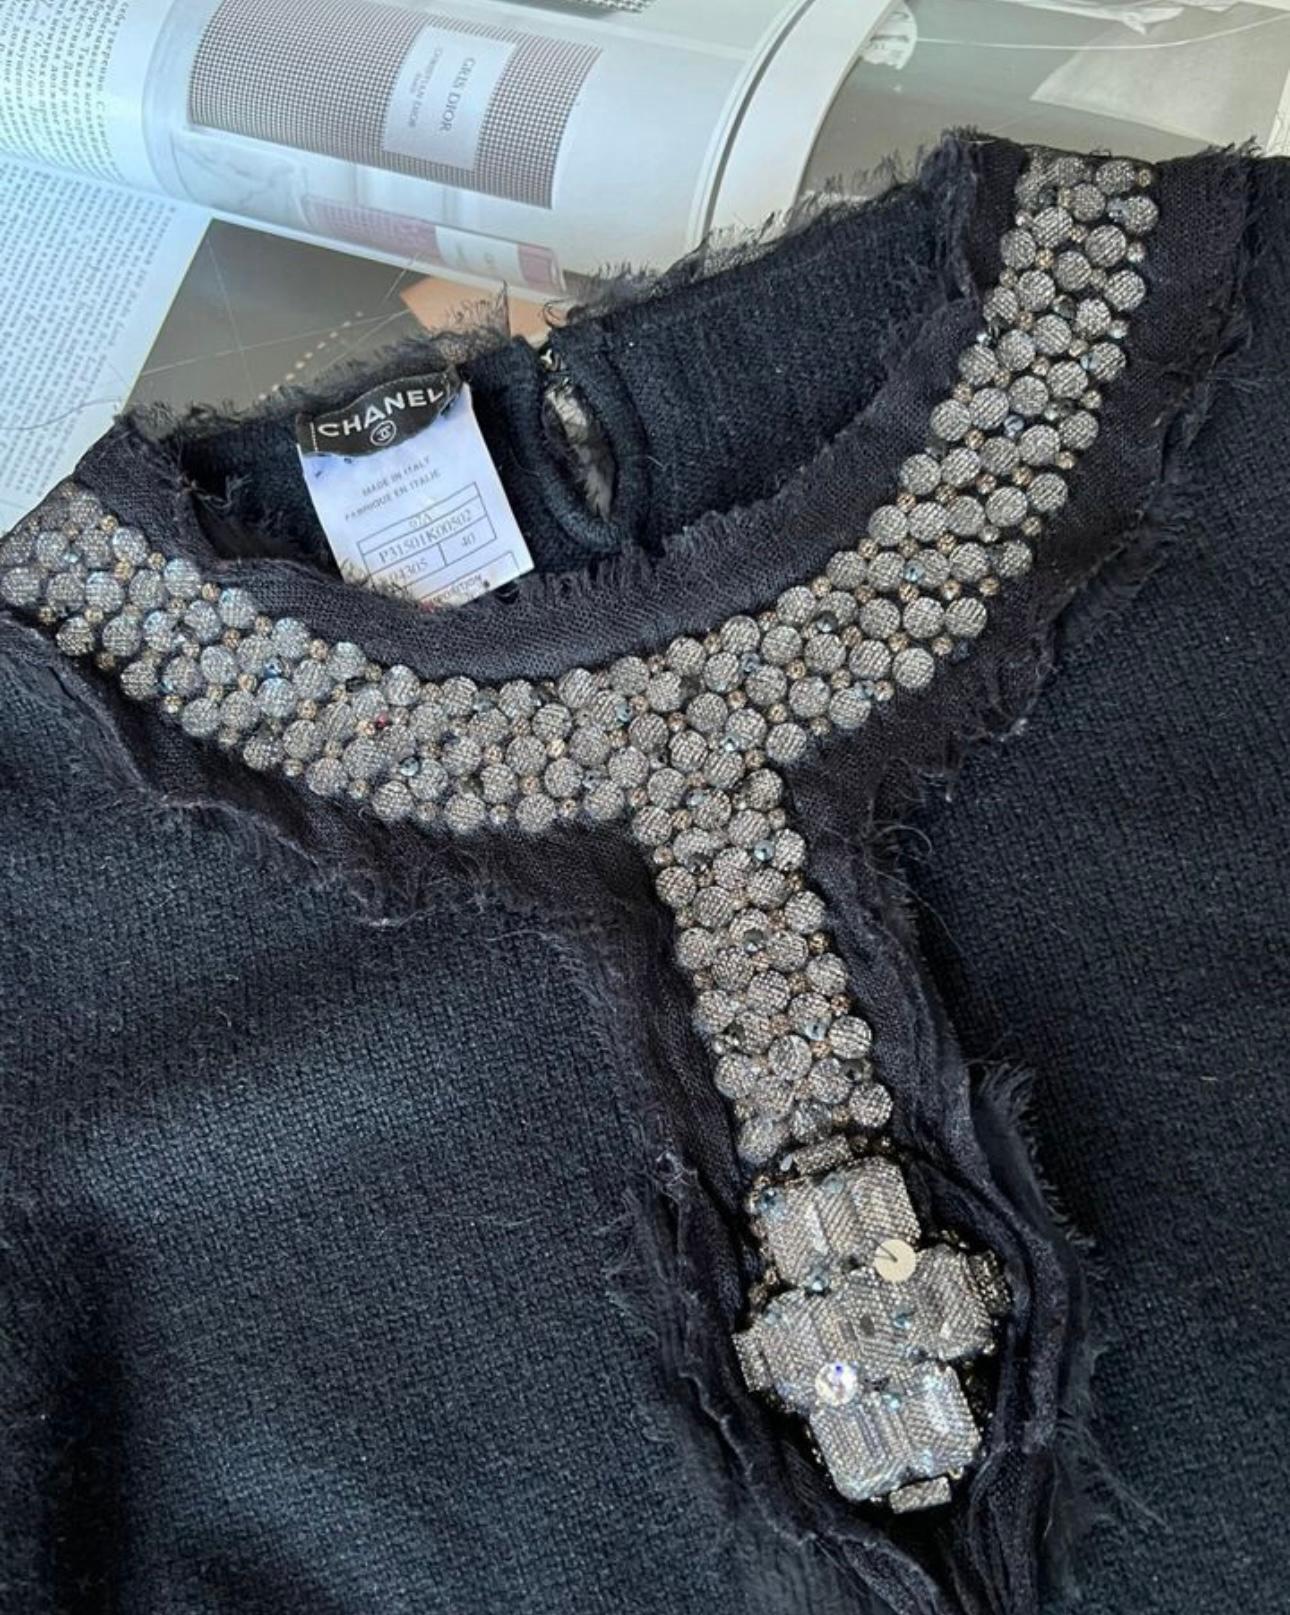 Chanel Jewel Embellishment Cashmere Jumper In Excellent Condition For Sale In Dubai, AE